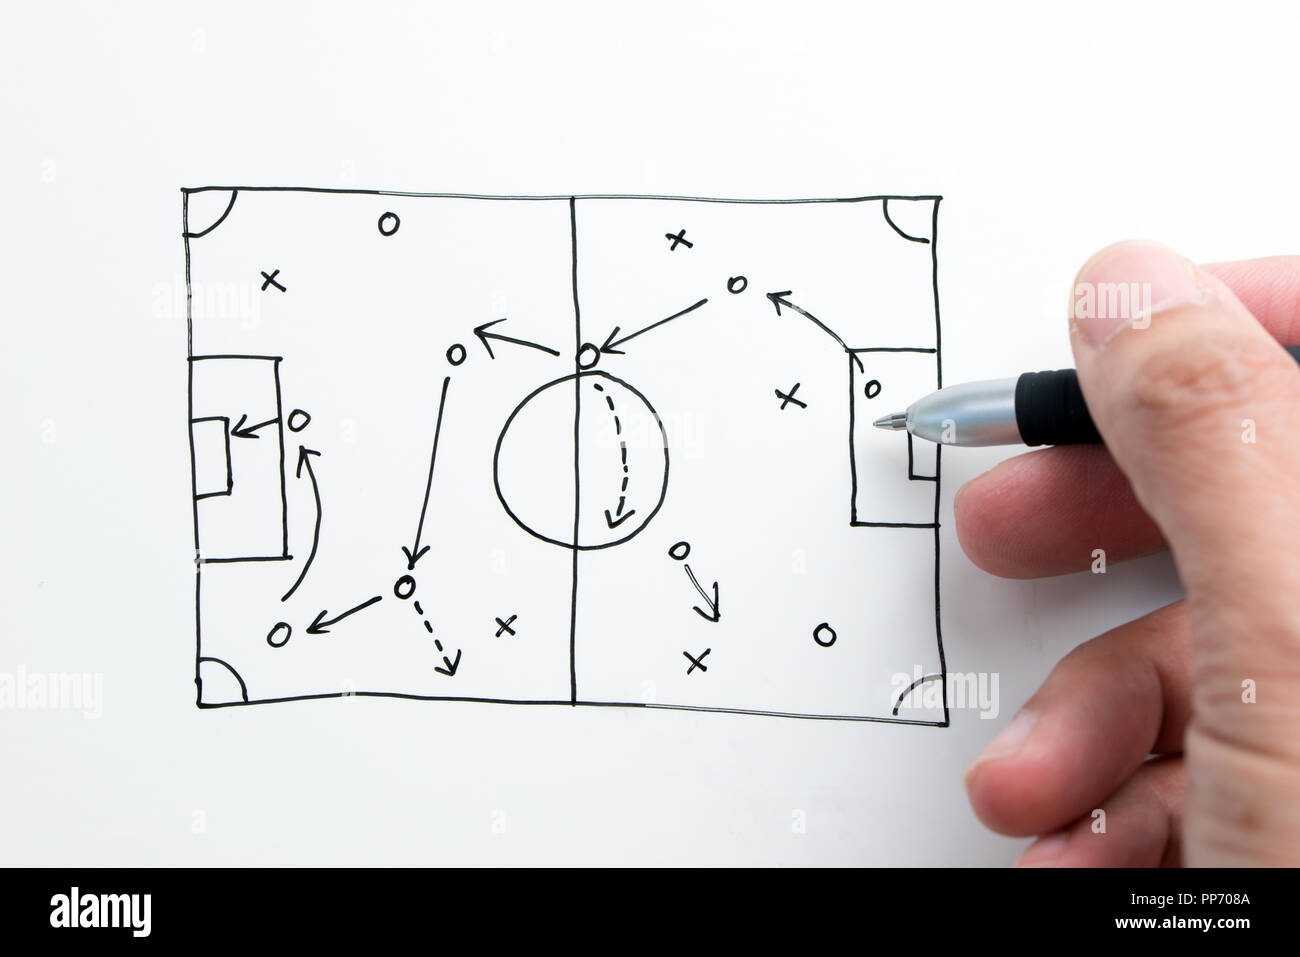 Sketch of soccer tactic on paper Stock Photo